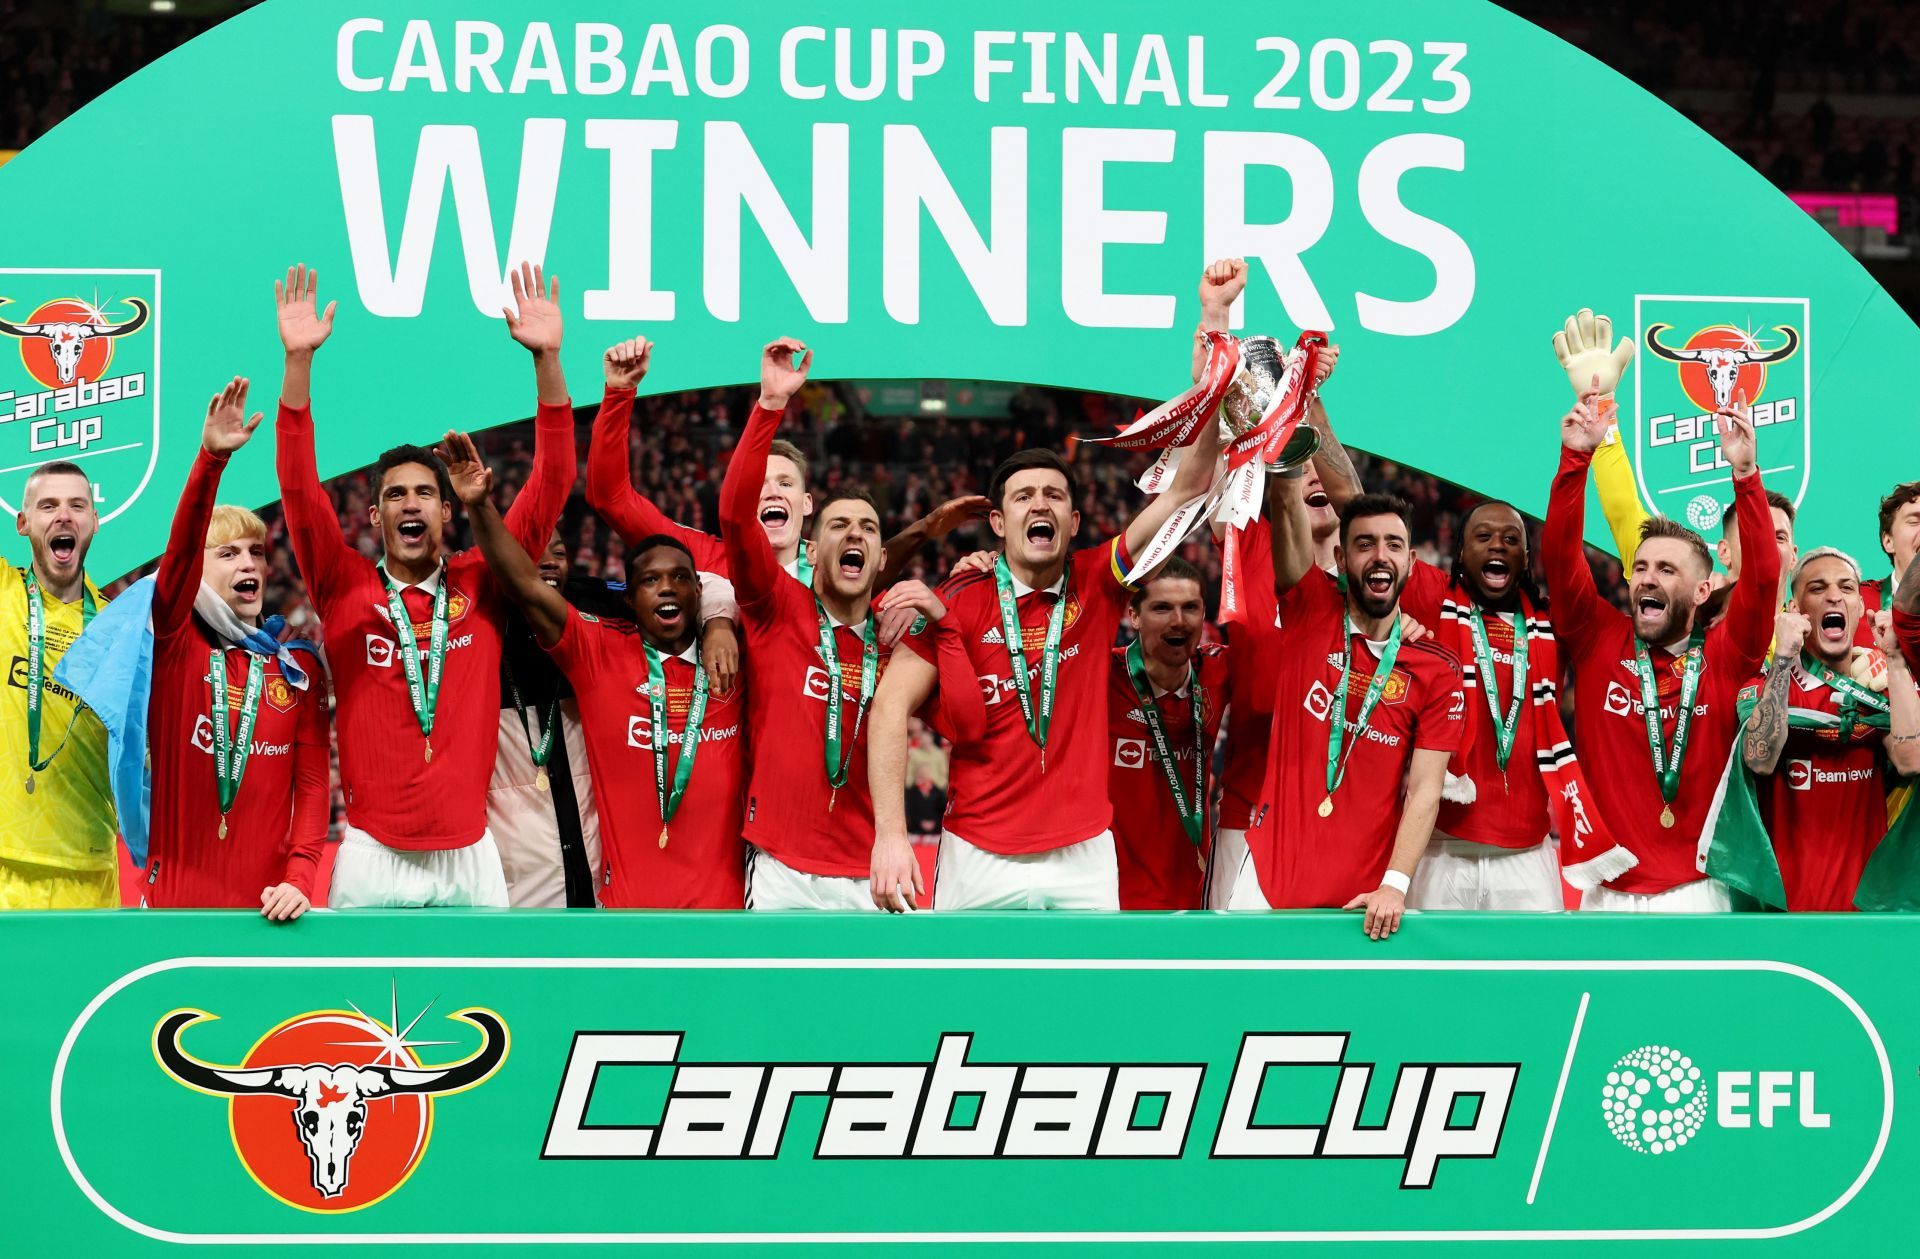 The Red Devils won the Carabao Cup.